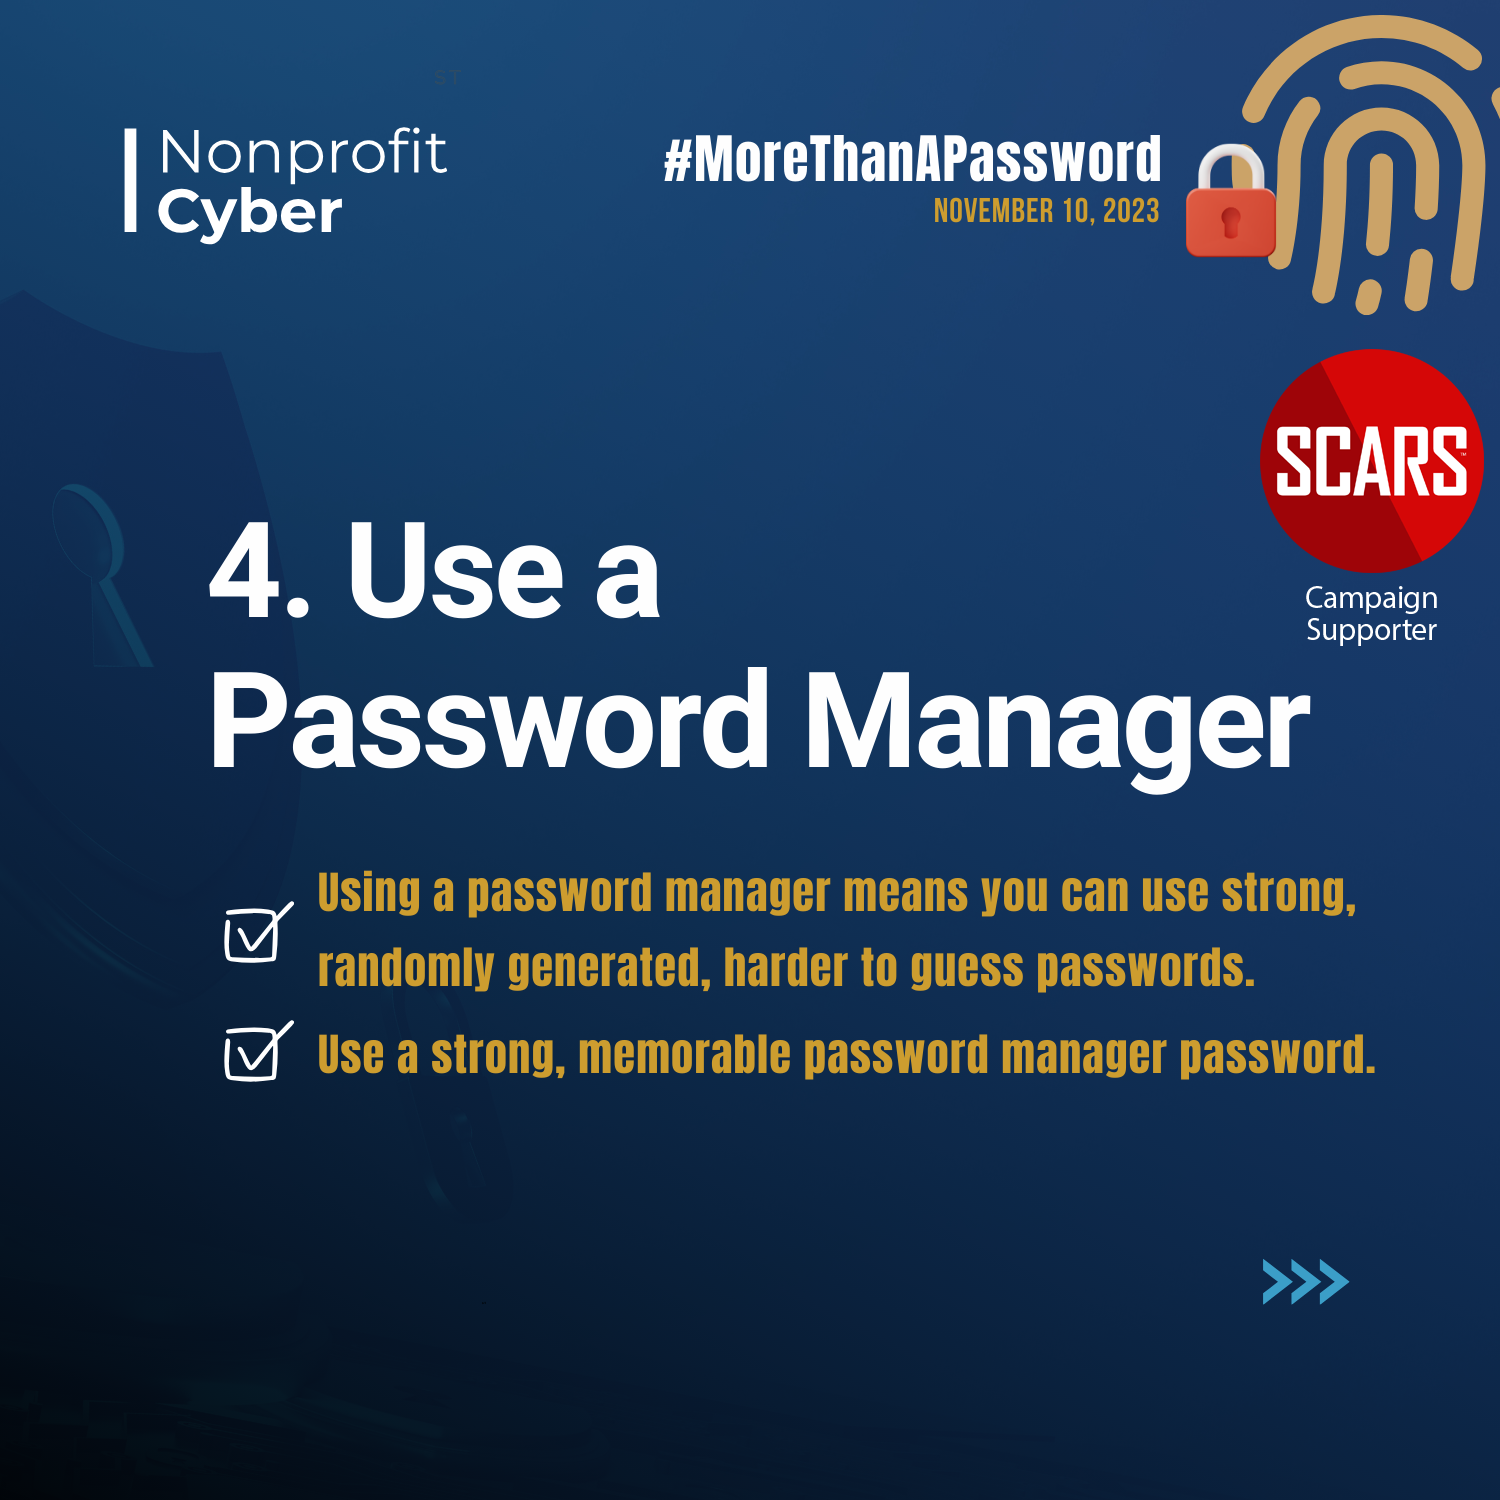 Common Guidance on Passwords